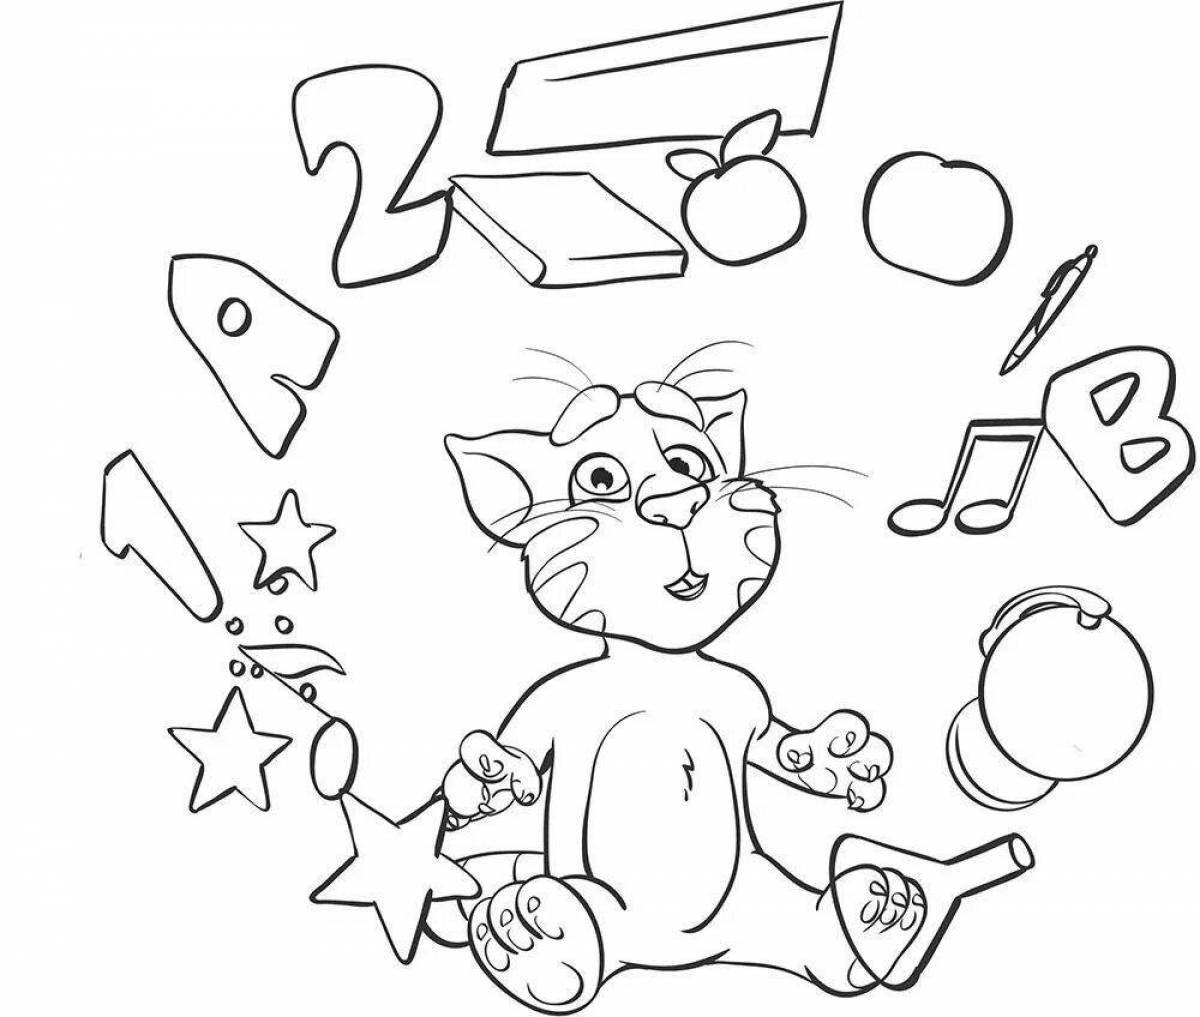 Coloring page happy ginger cat